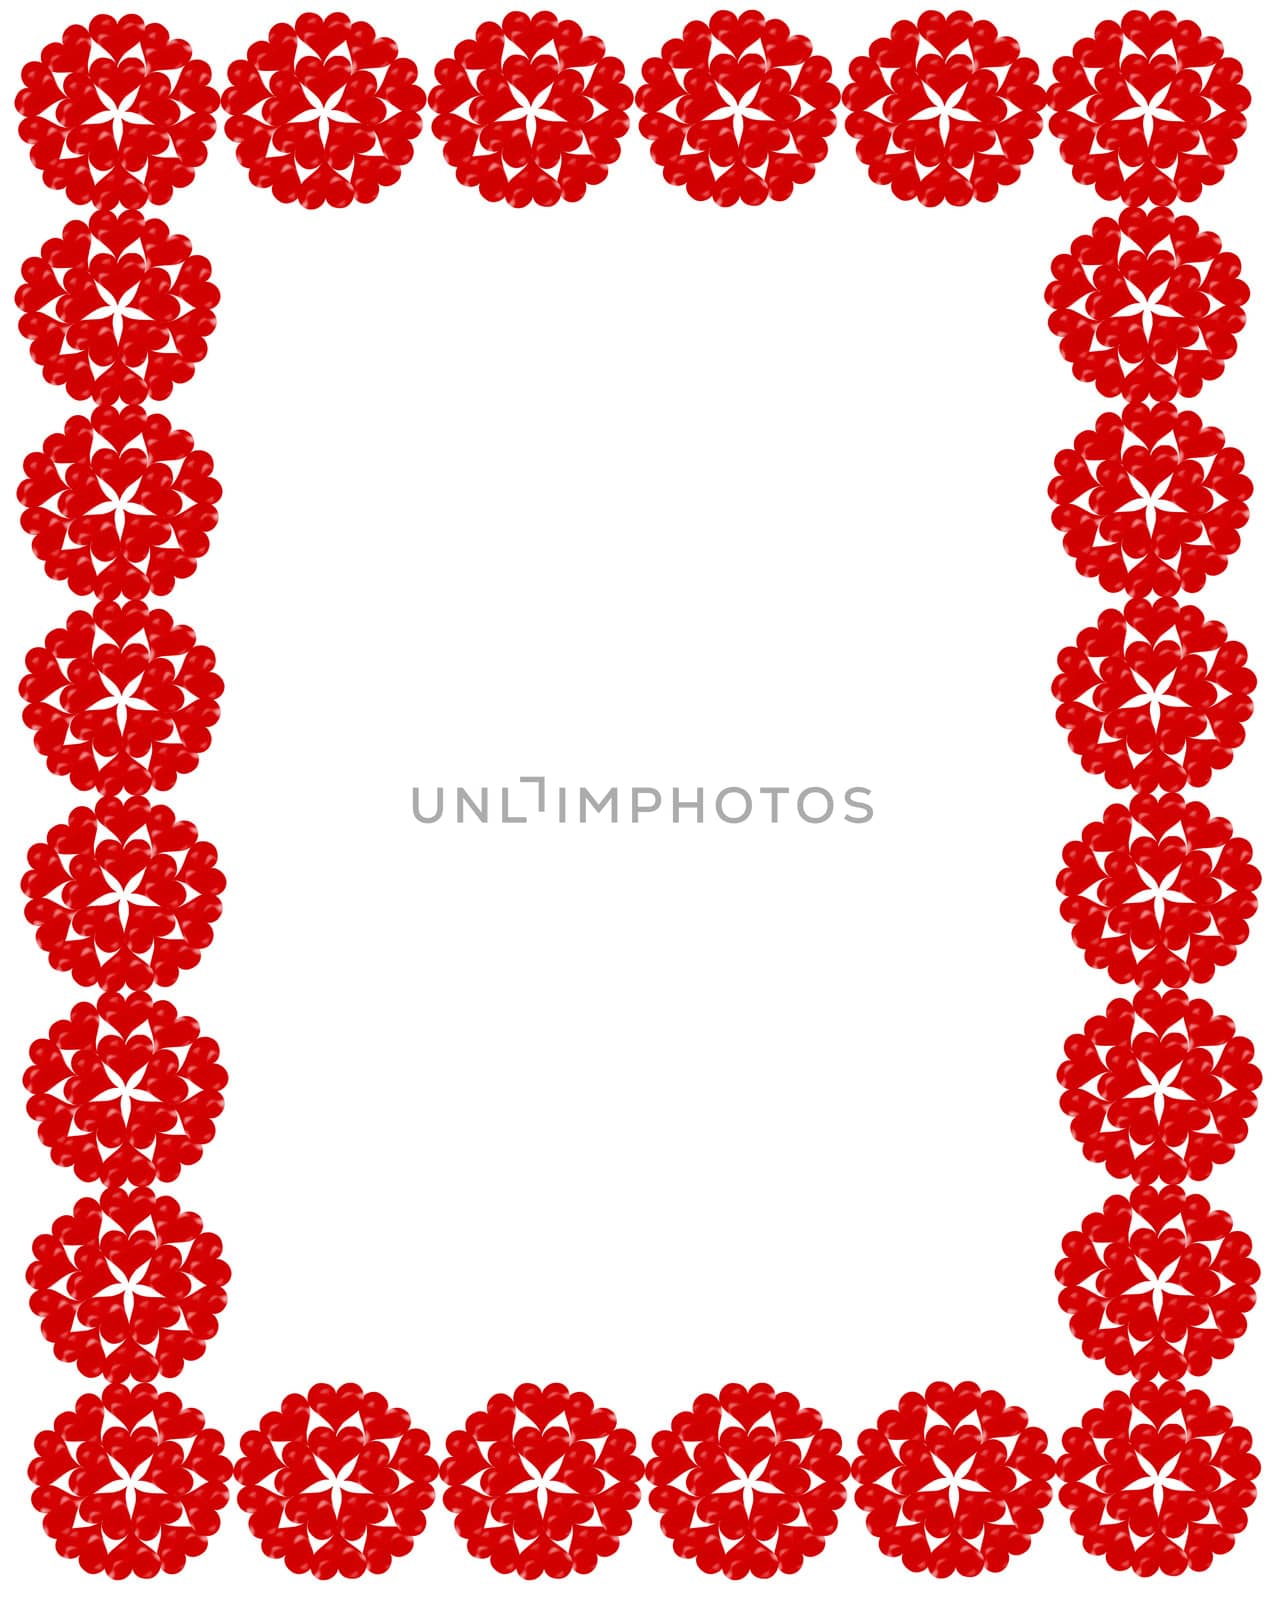 frame from the red Ukrainian patterns by alexmak